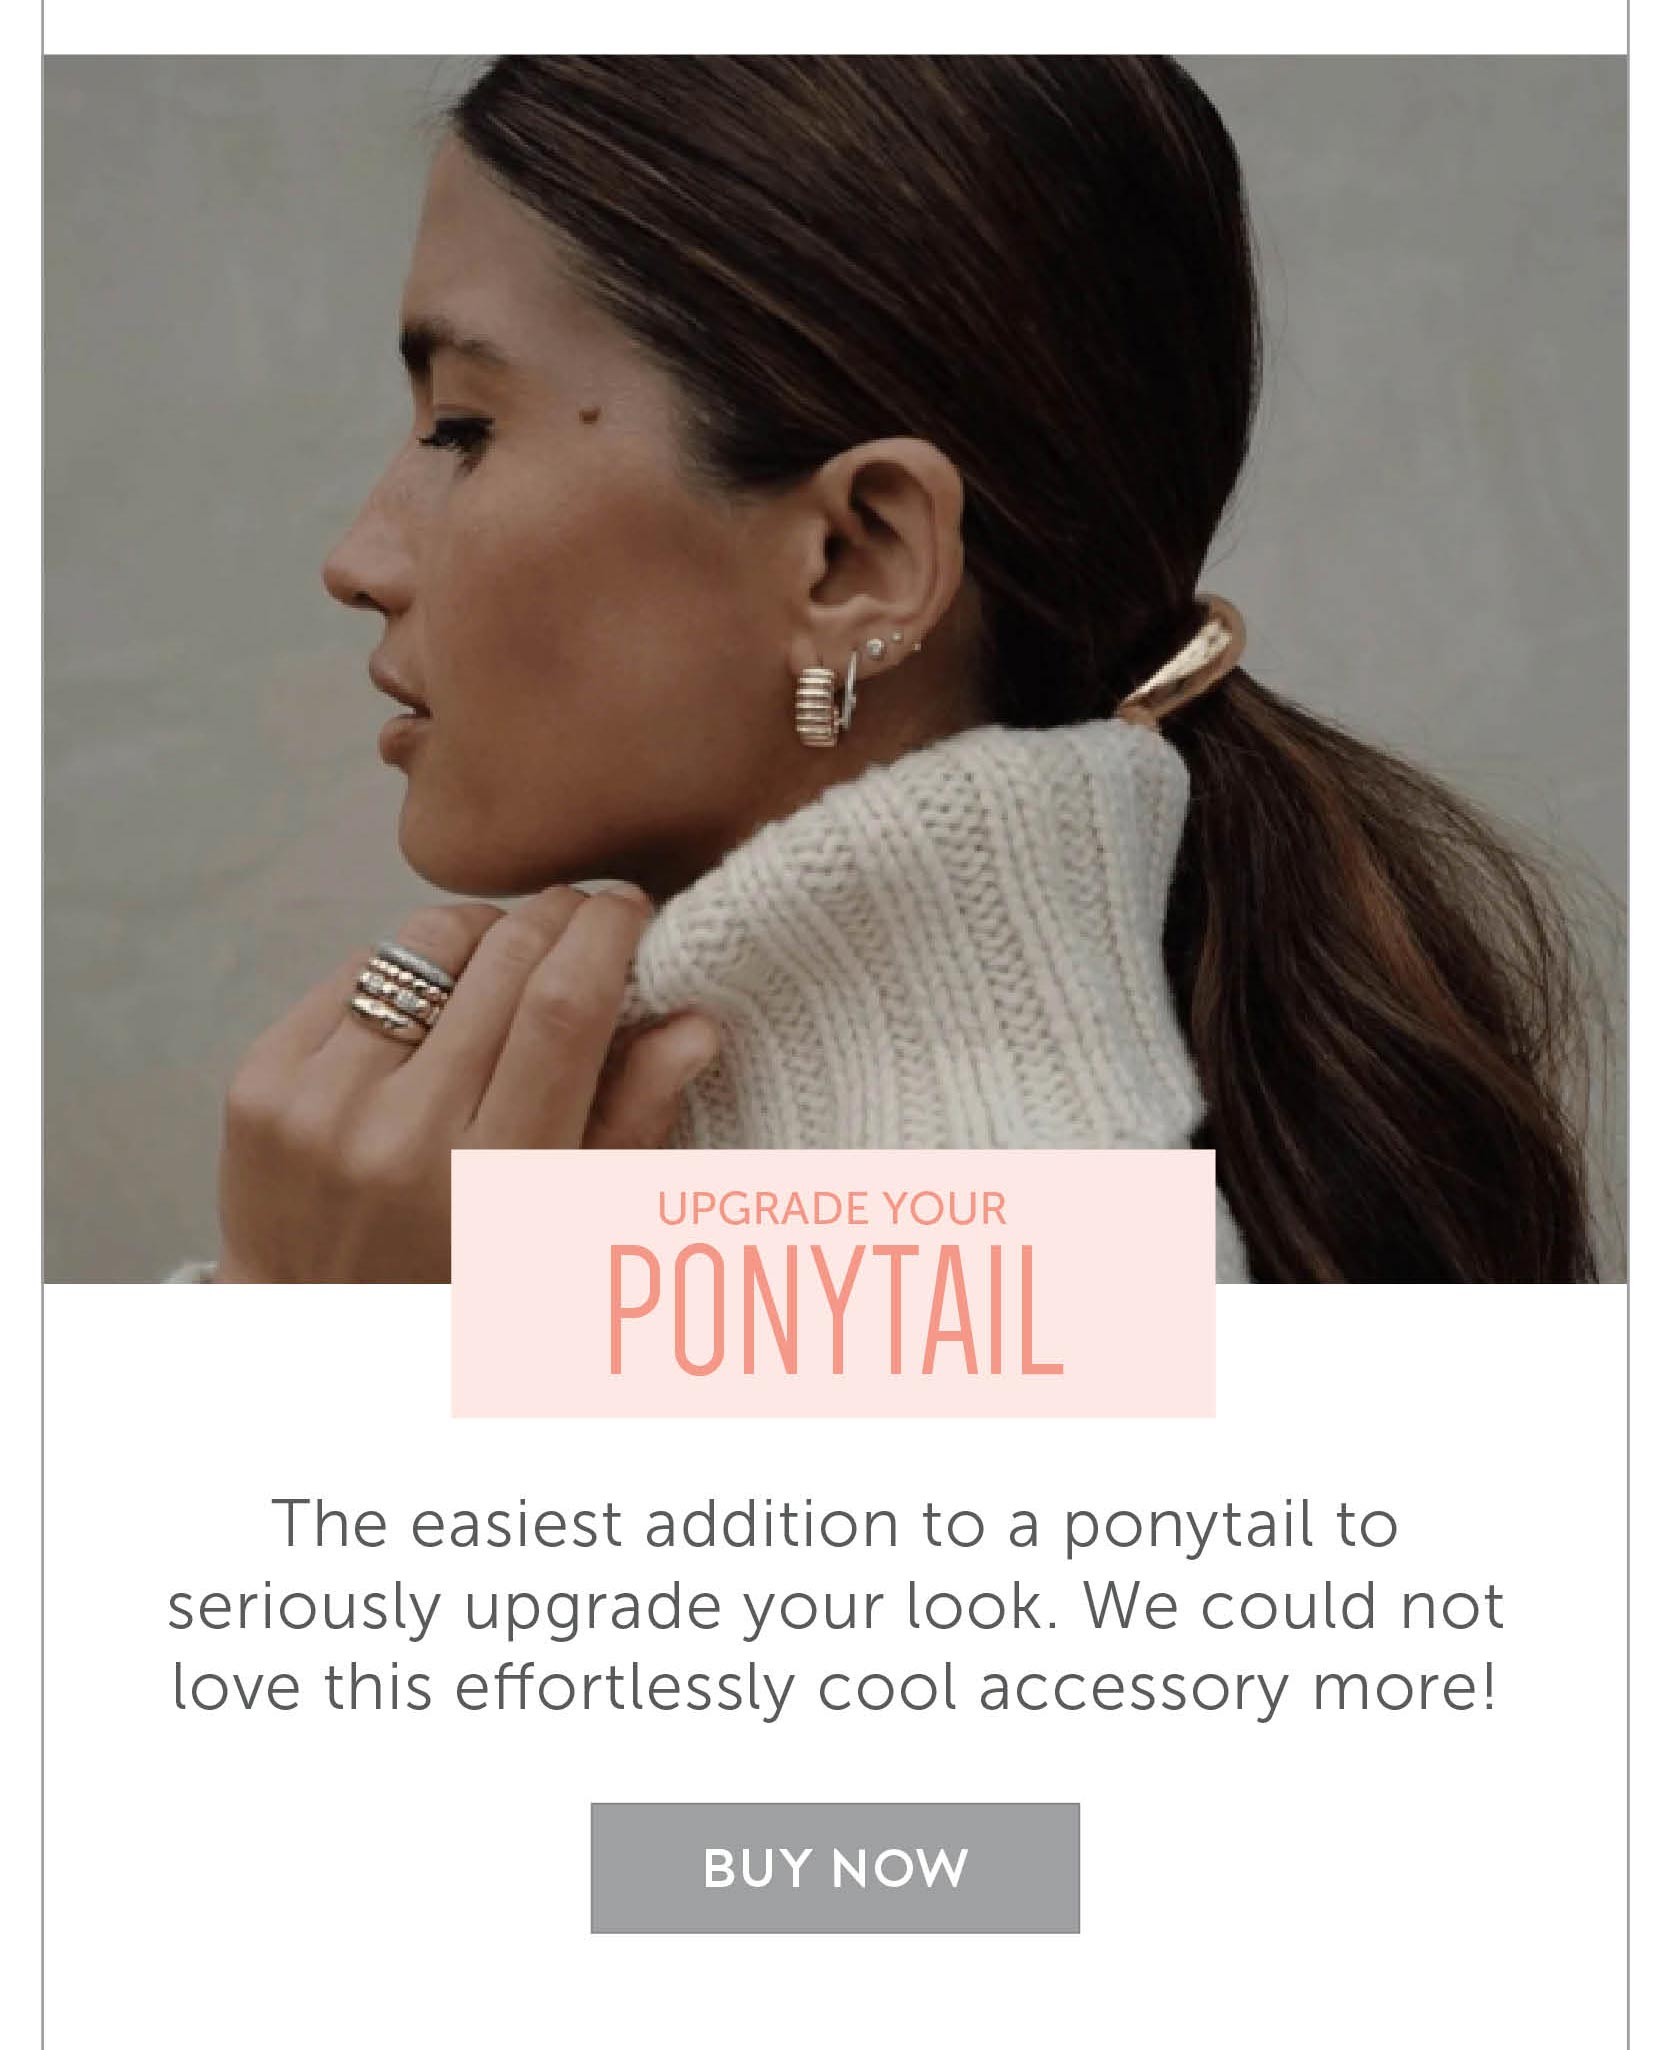 Upgrade your ponytail The easiest addition to a ponytail to seriously upgrade your look. We could not love this effortlessly cool accessory more! 